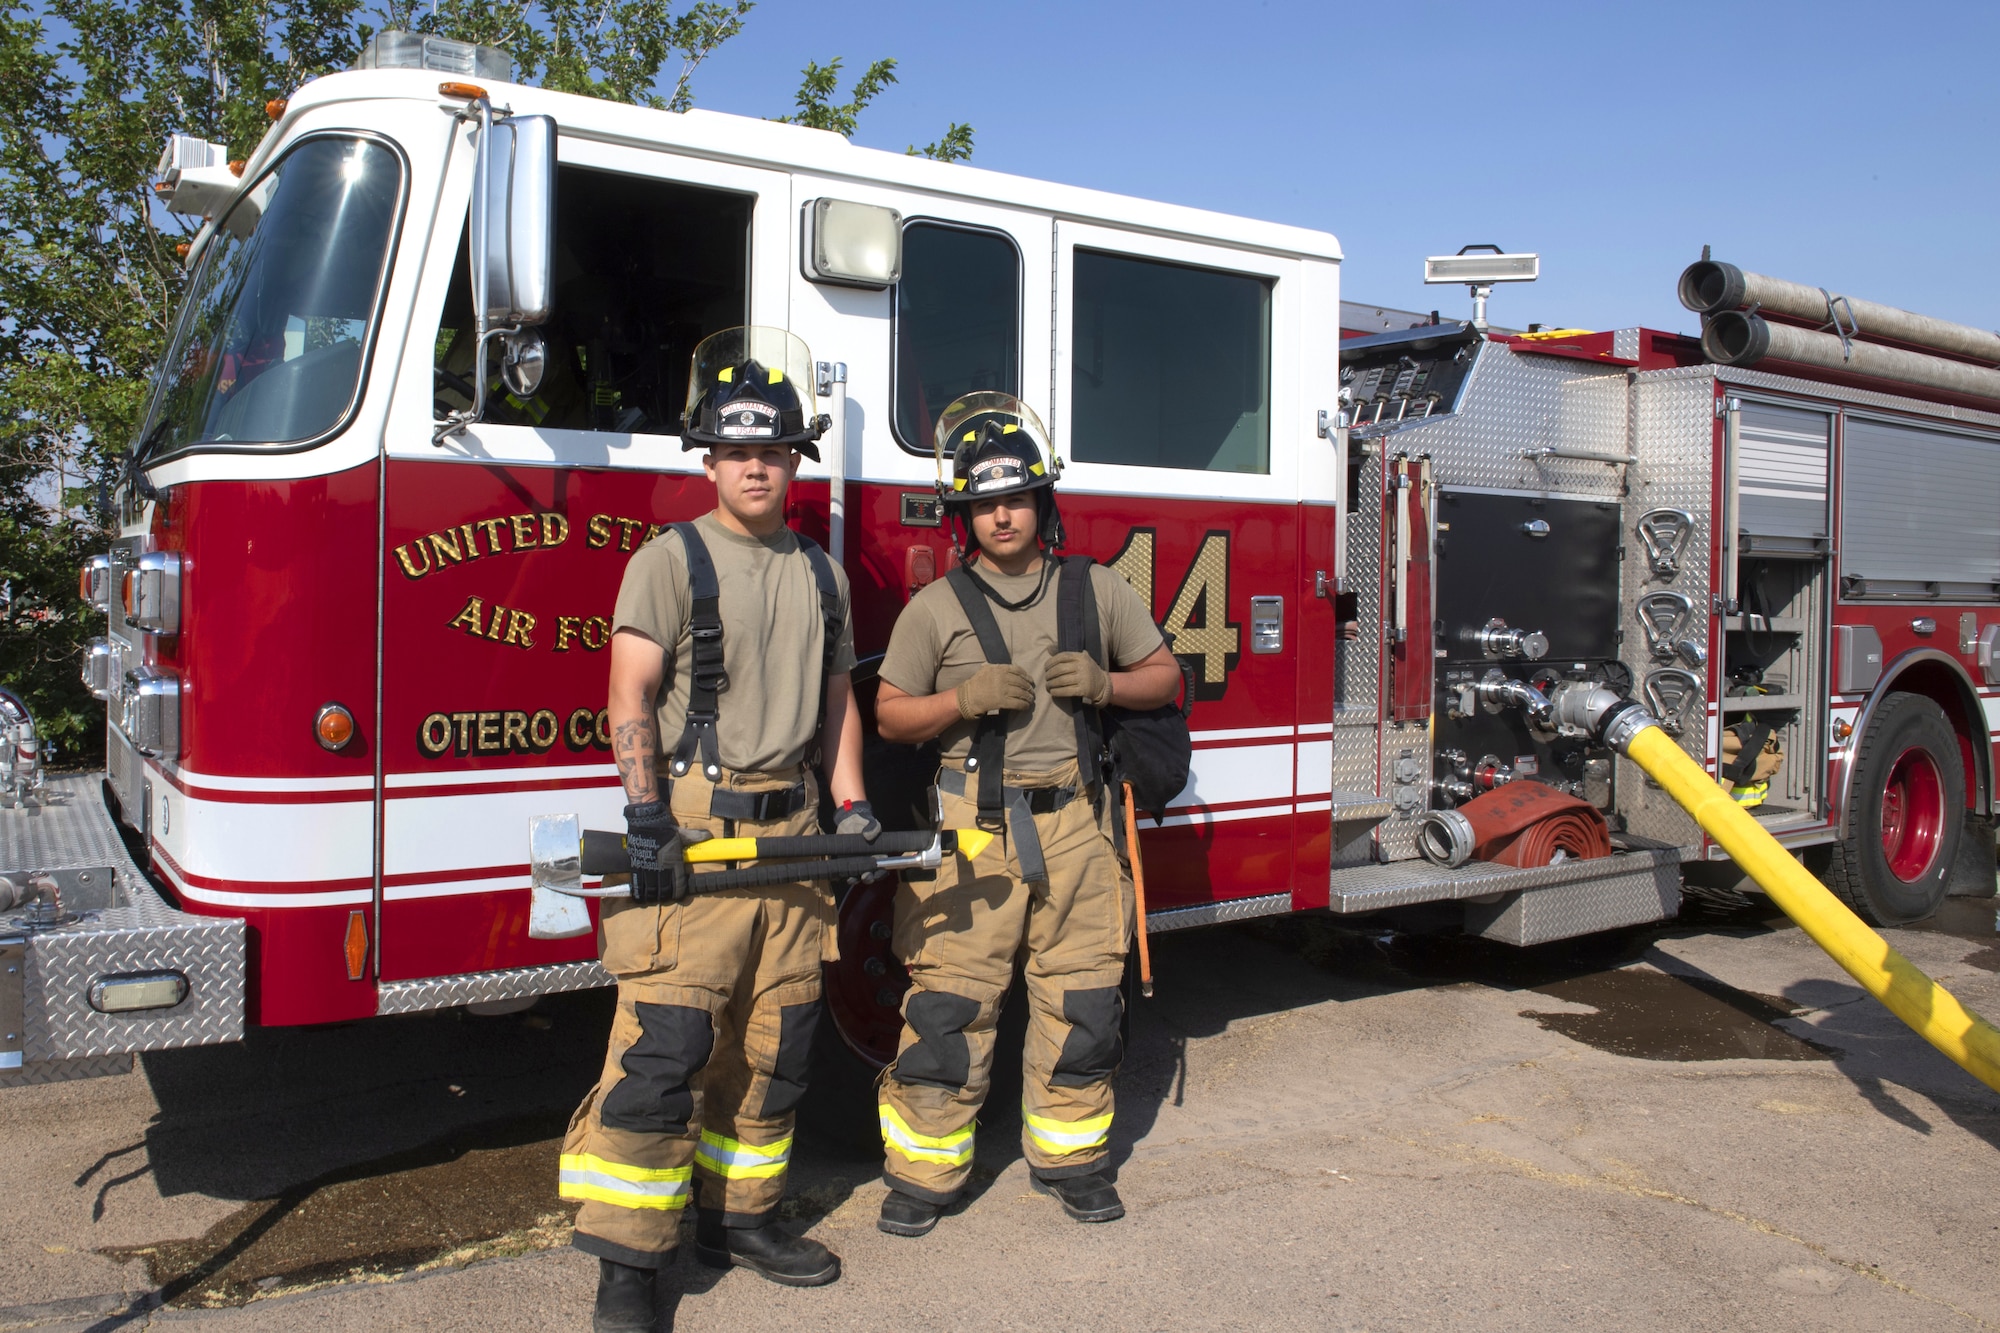 Airman 1st Class Jayden Zepeda (left) and Airman 1st Class Kevin Gomez (right), 49th Civil Engineer Squadron firefighters, pose for a photo after an emergency response training exercise, May 19, 2022, on Holloman Air Force Base, New Mexico.